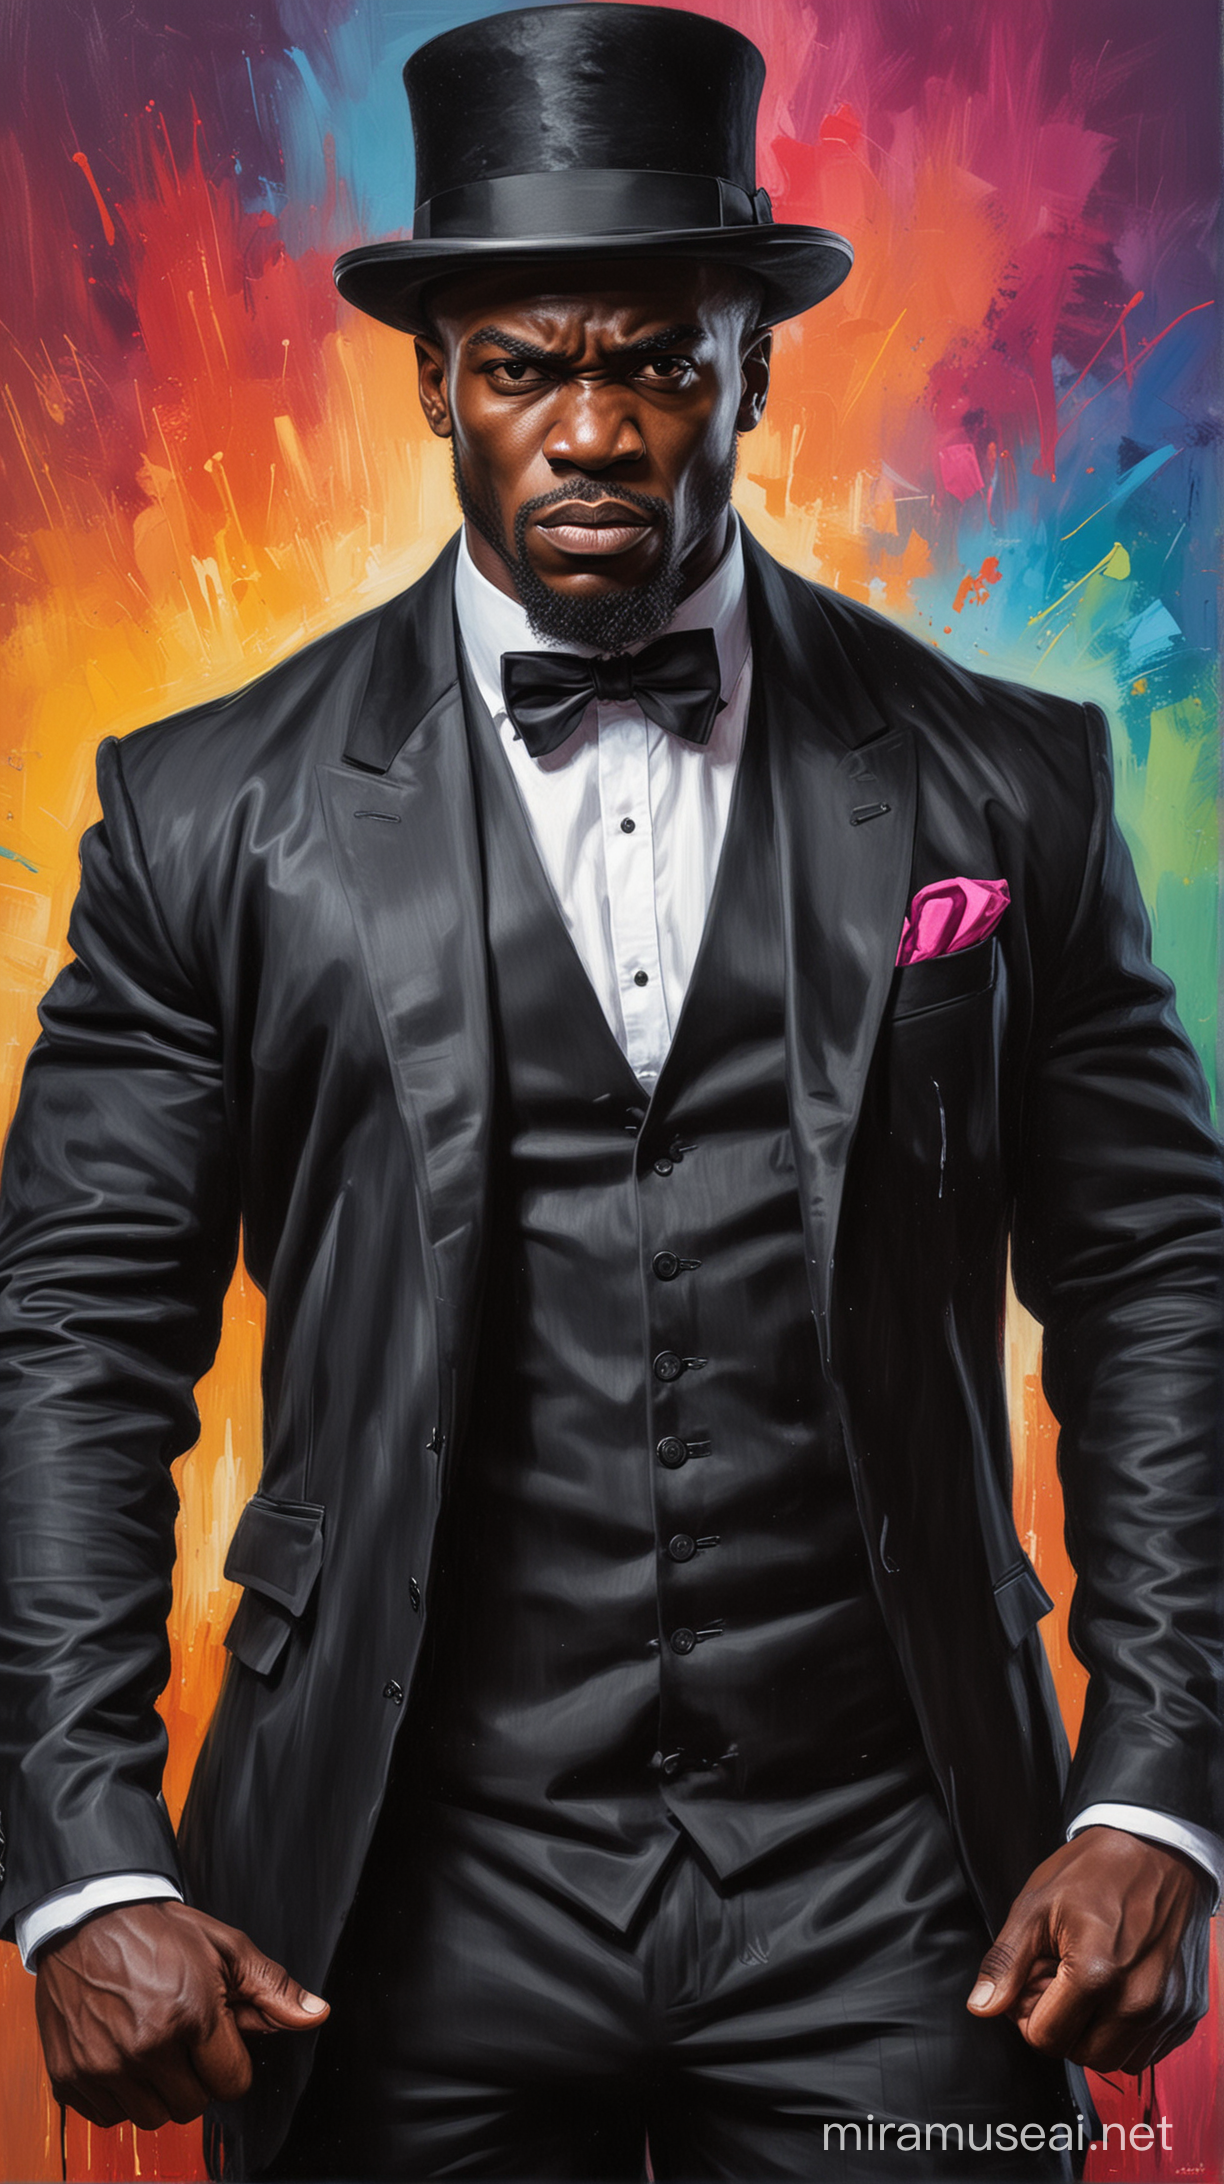 Painting of an angry muscular African man in black jacket and a top hat with colourful background